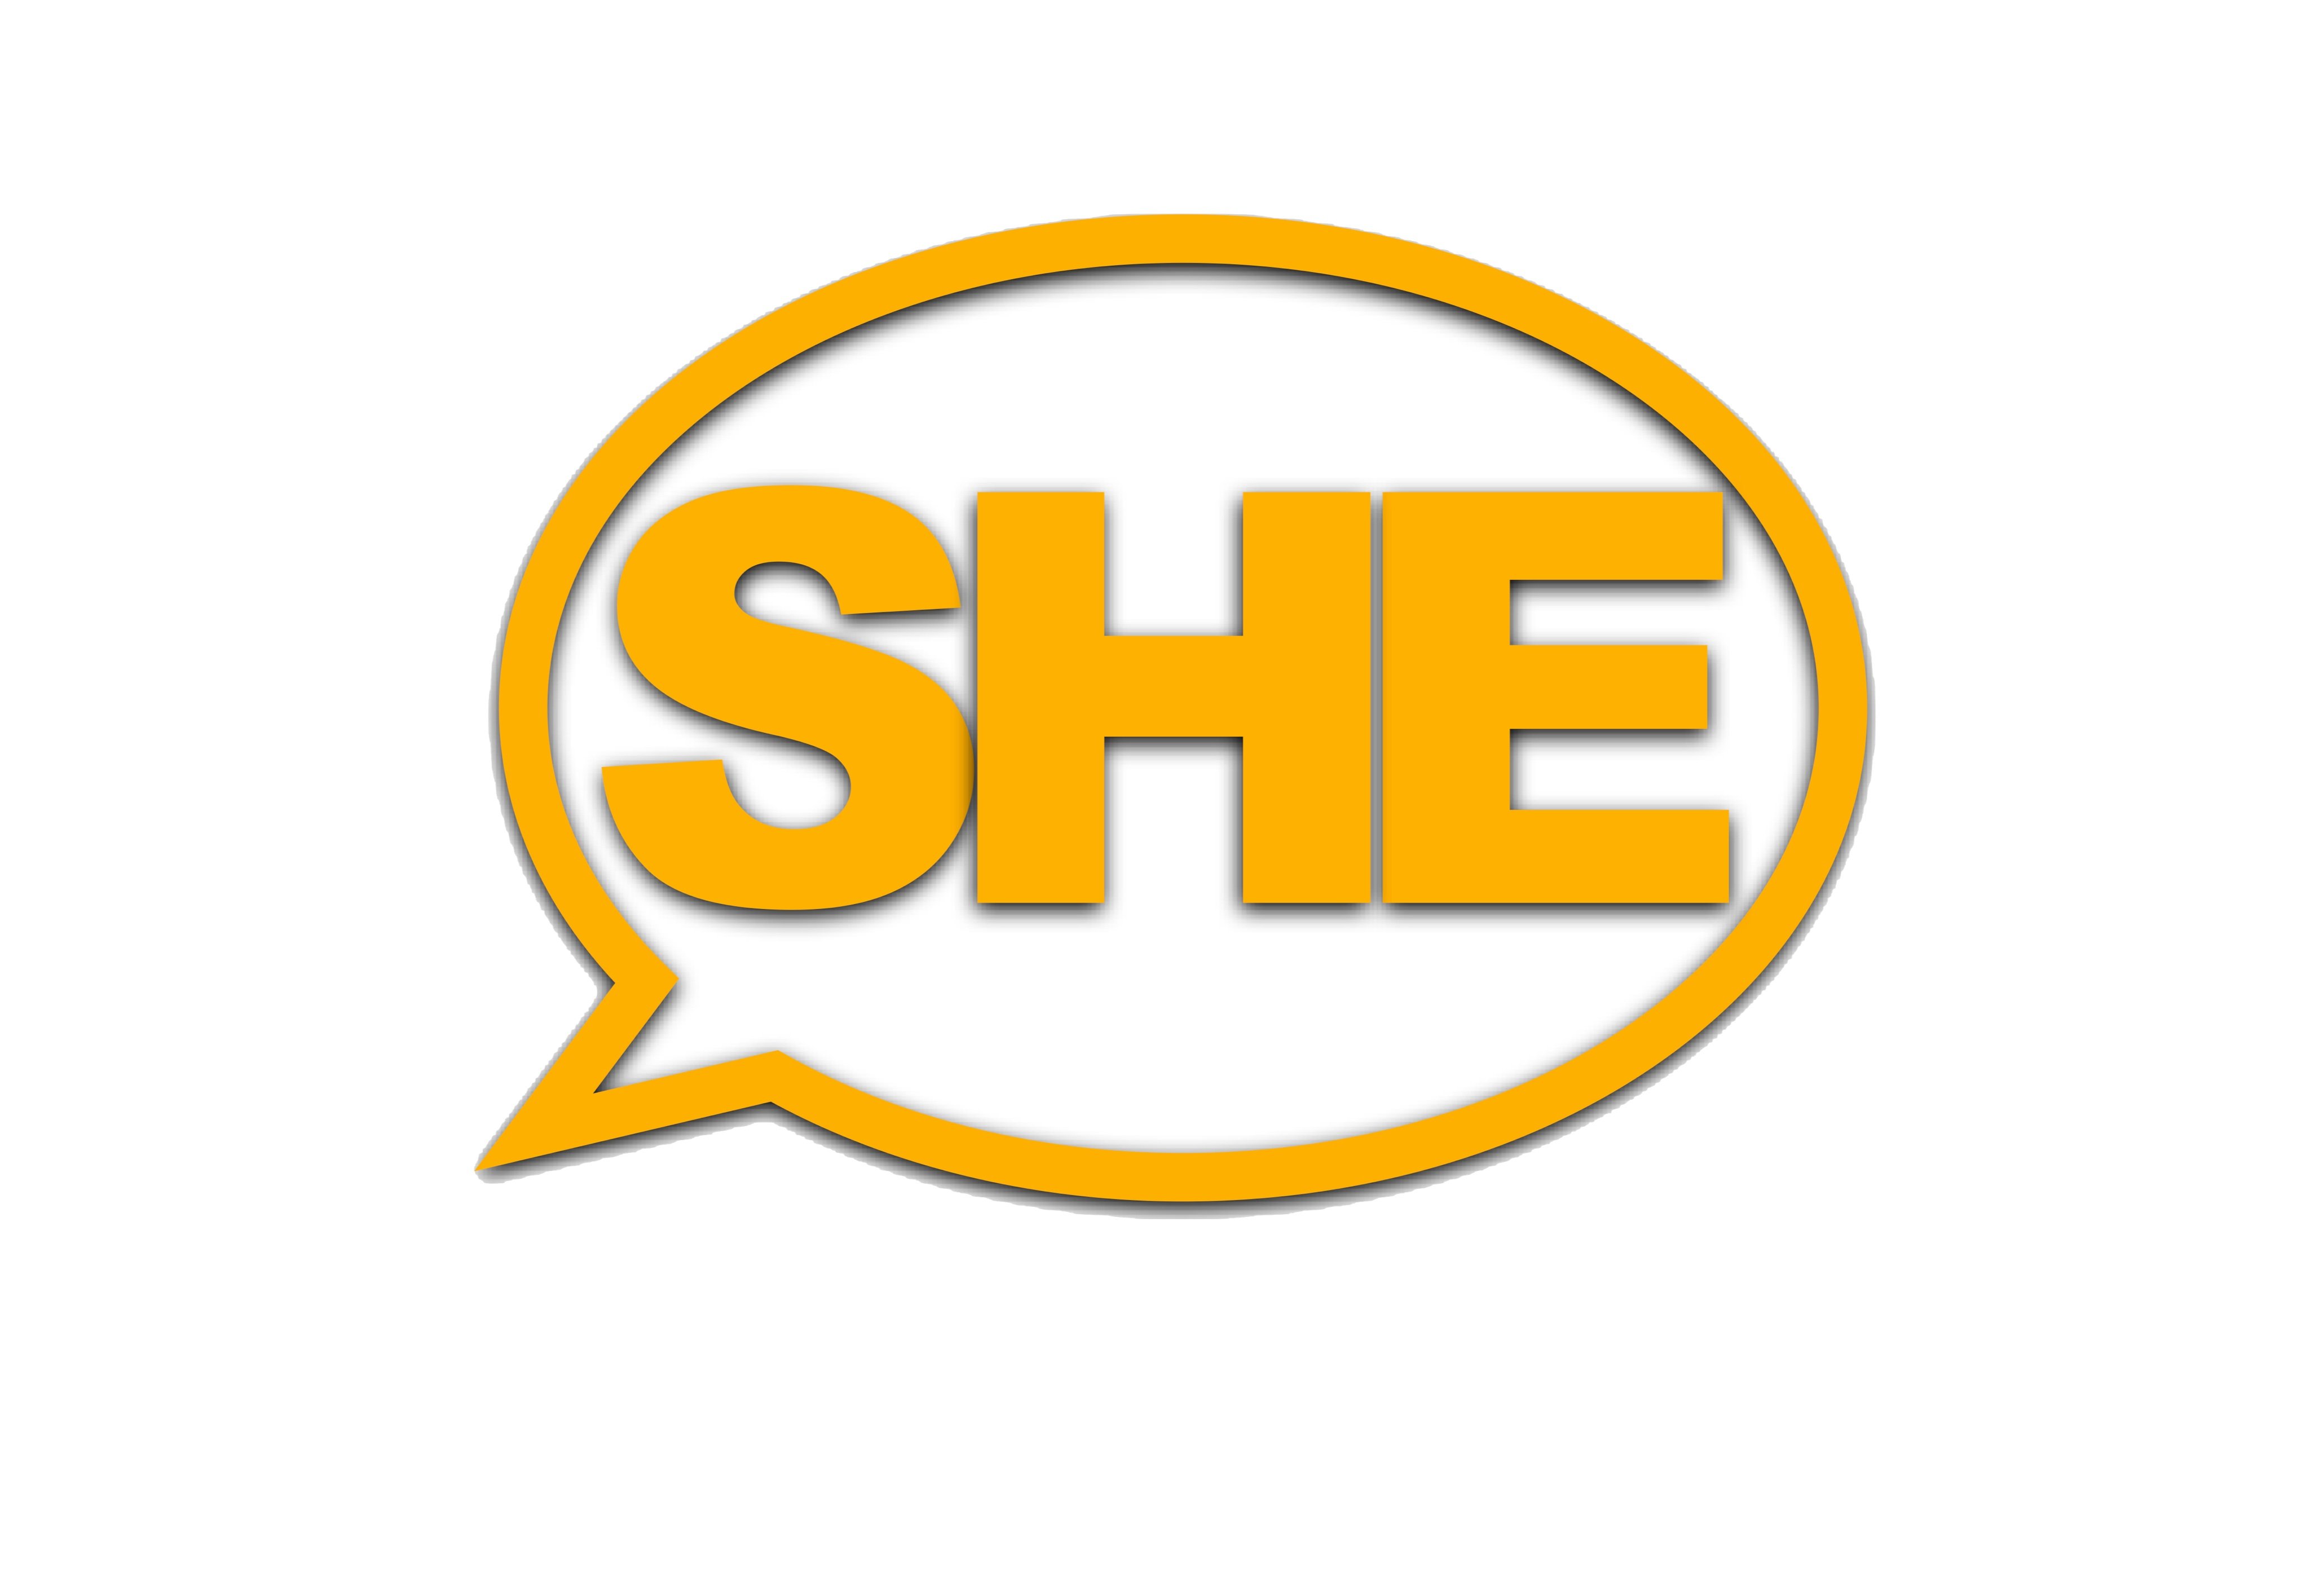 Women + men with a passion to share the contributions of women that impact our world, influence issues & help bring about REAL CHANGE for all of us. #SHE